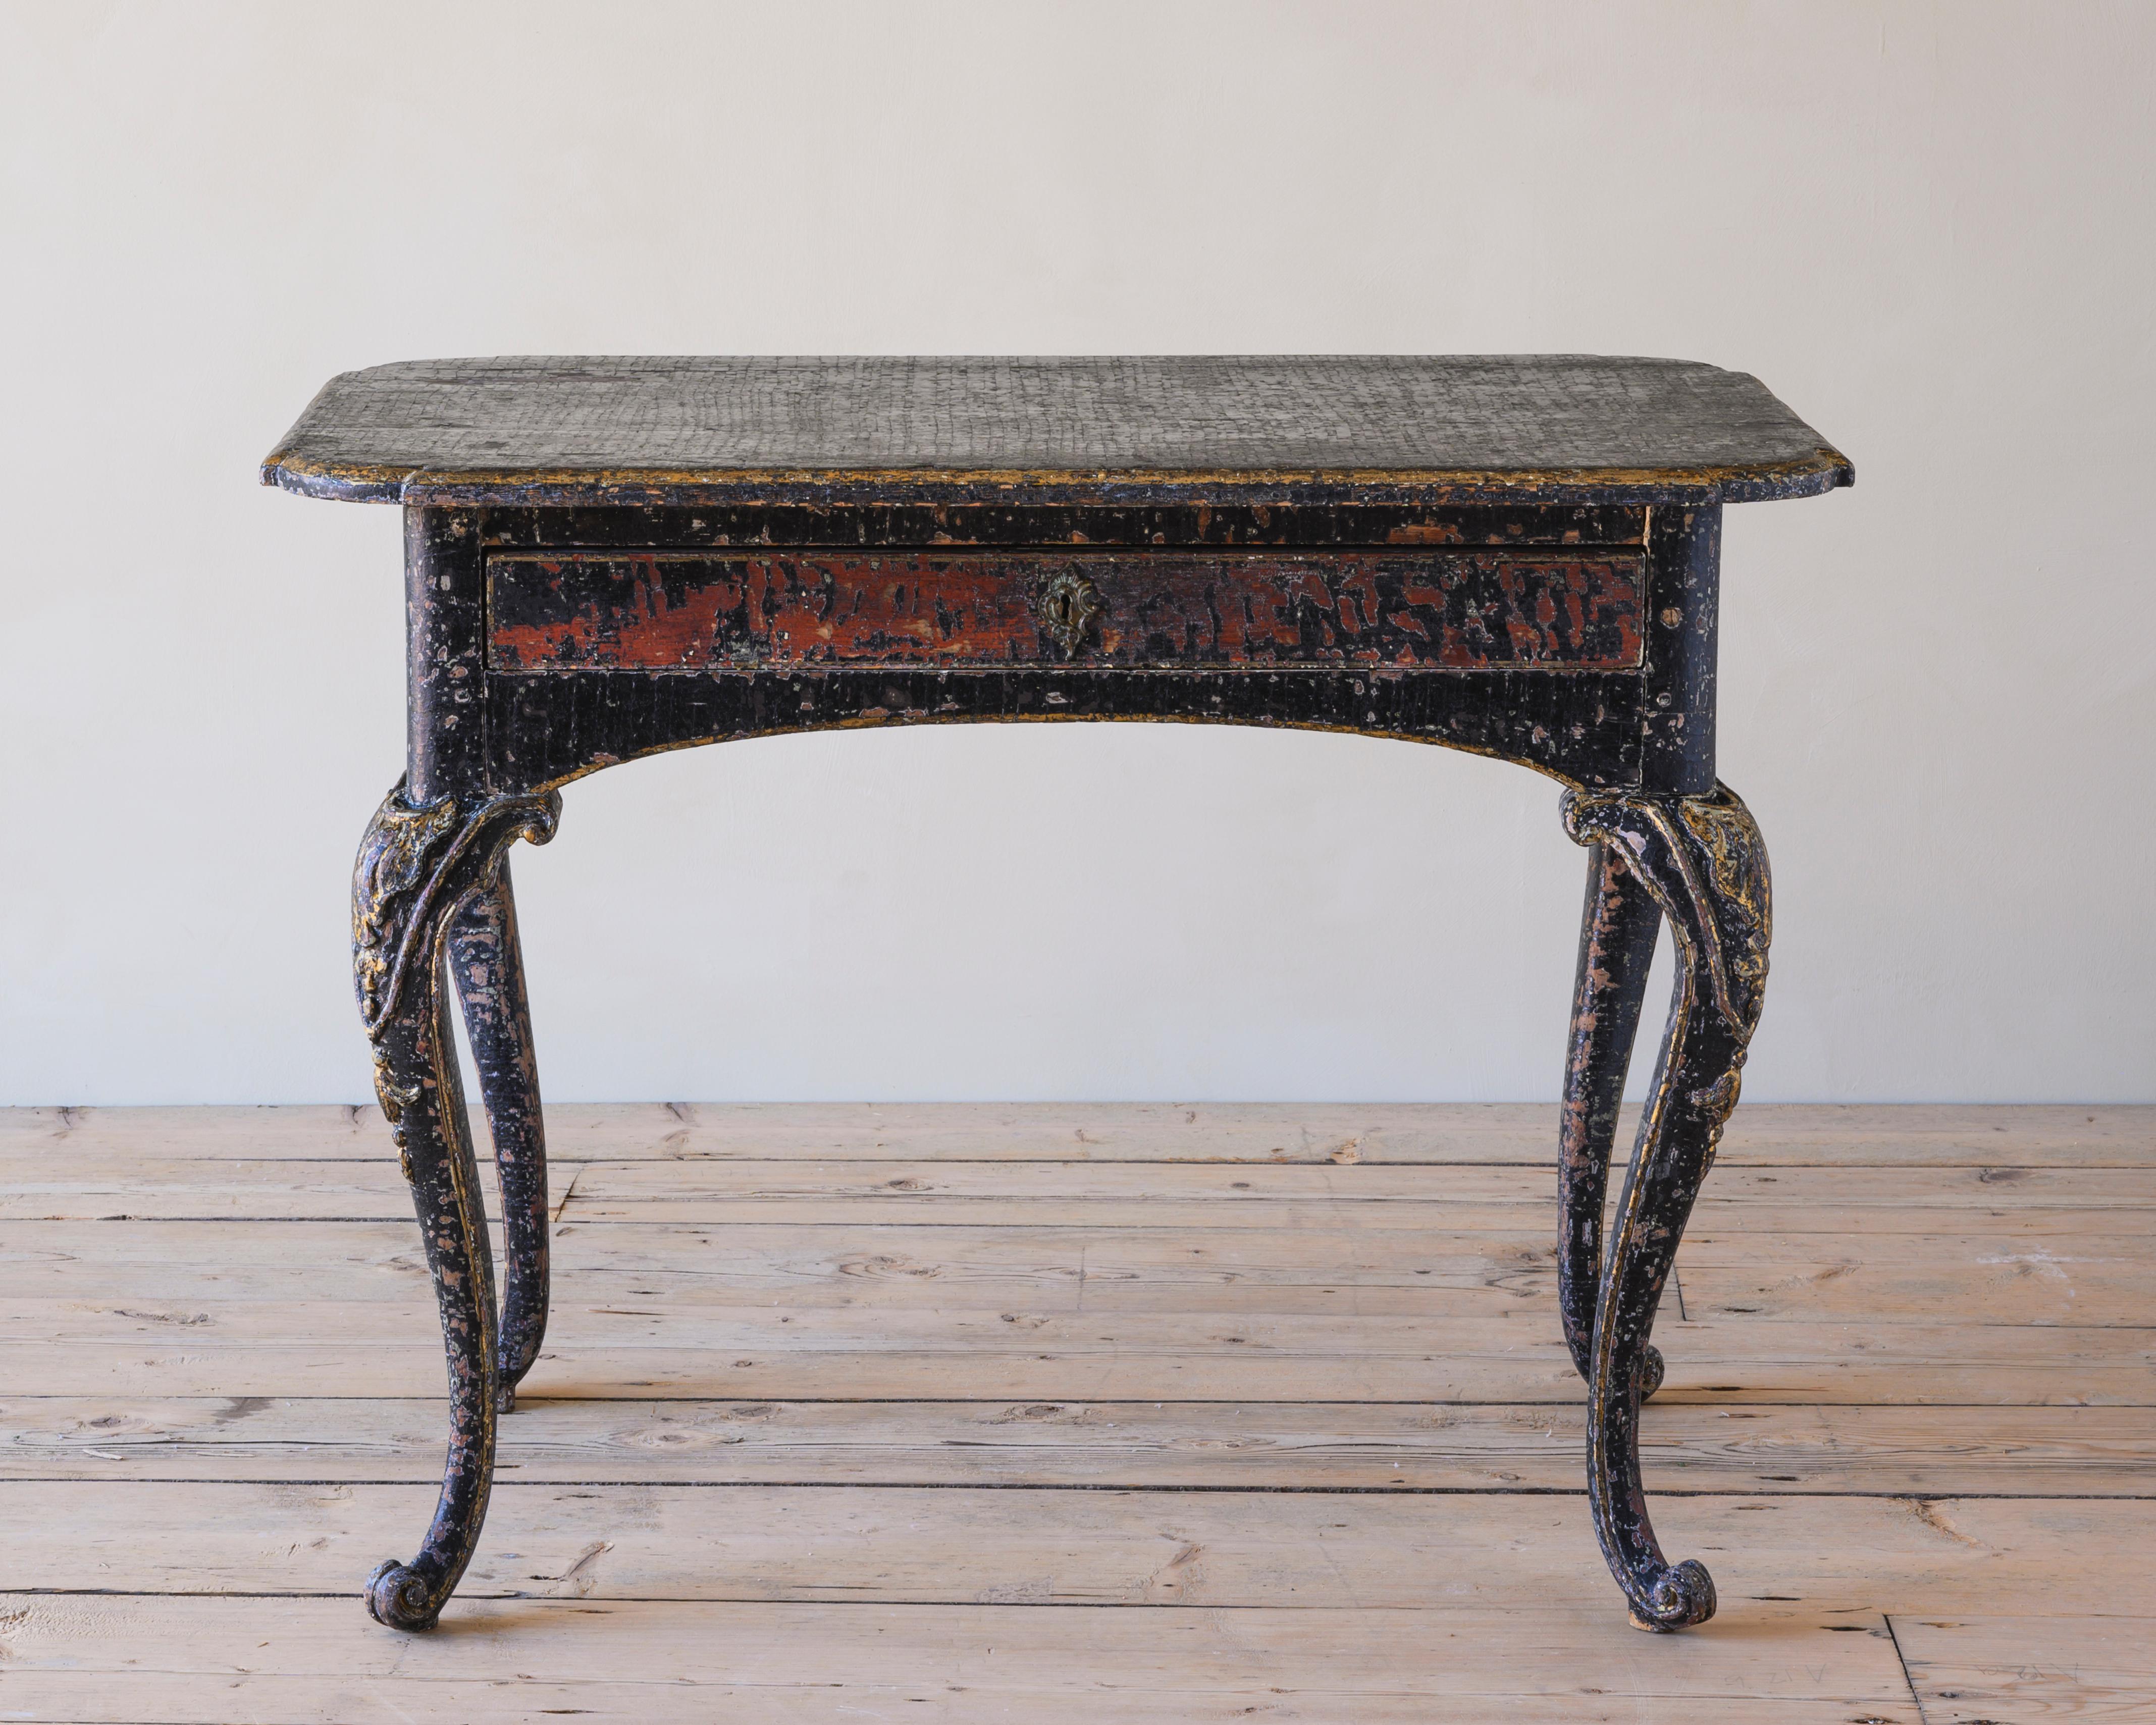 Fine and unusual 18th century Danish late Baroque console table with very good proportions and shape. Works equally well as a center table. Original color is red which can be seen under the black layer of color which was applied during the 19th